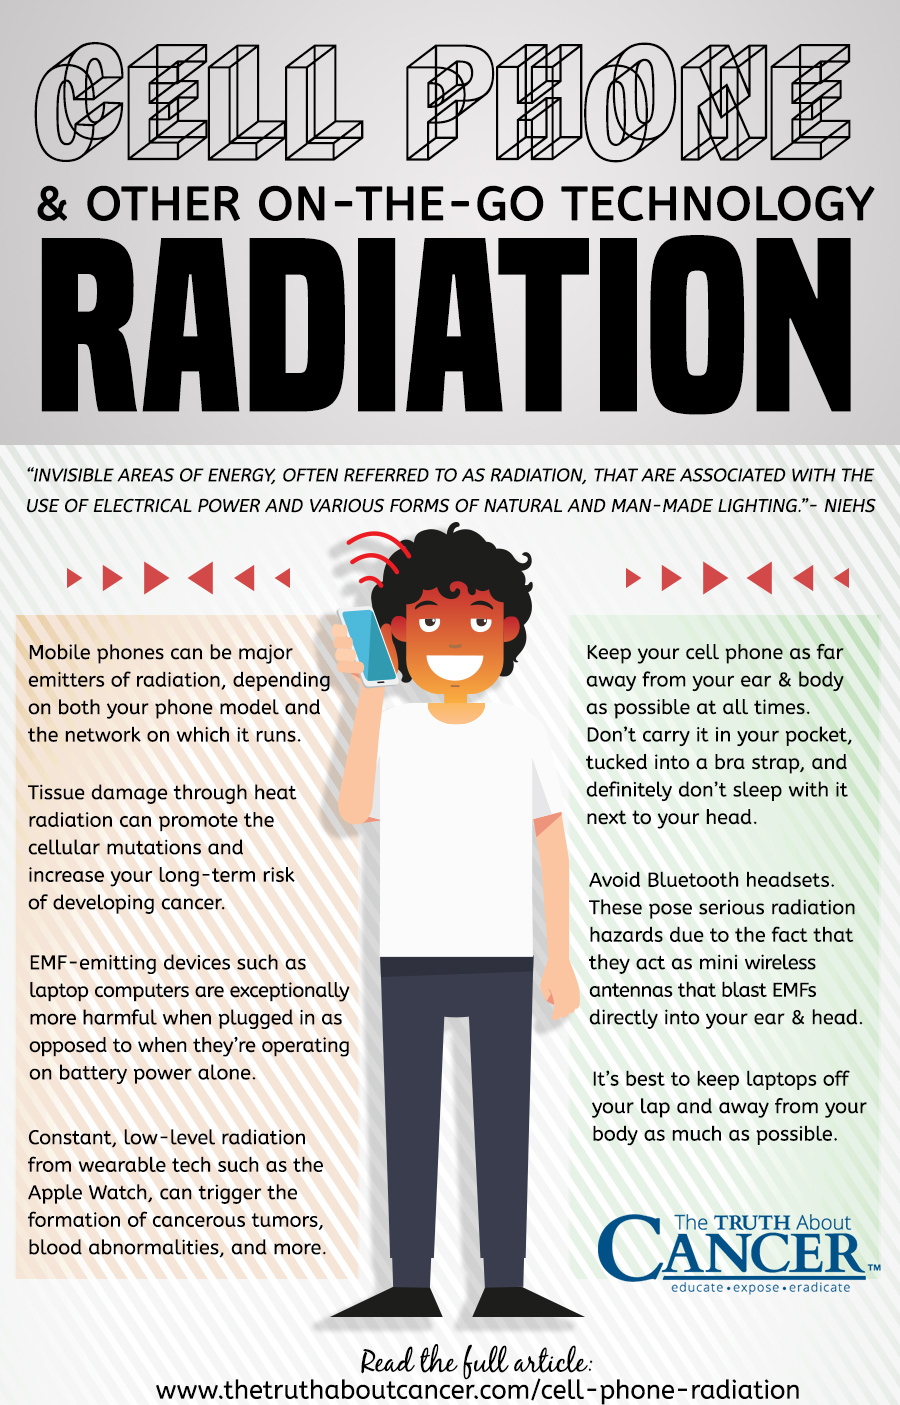 Become aware of the sources and dangers of cell phone radiation and EMFs.